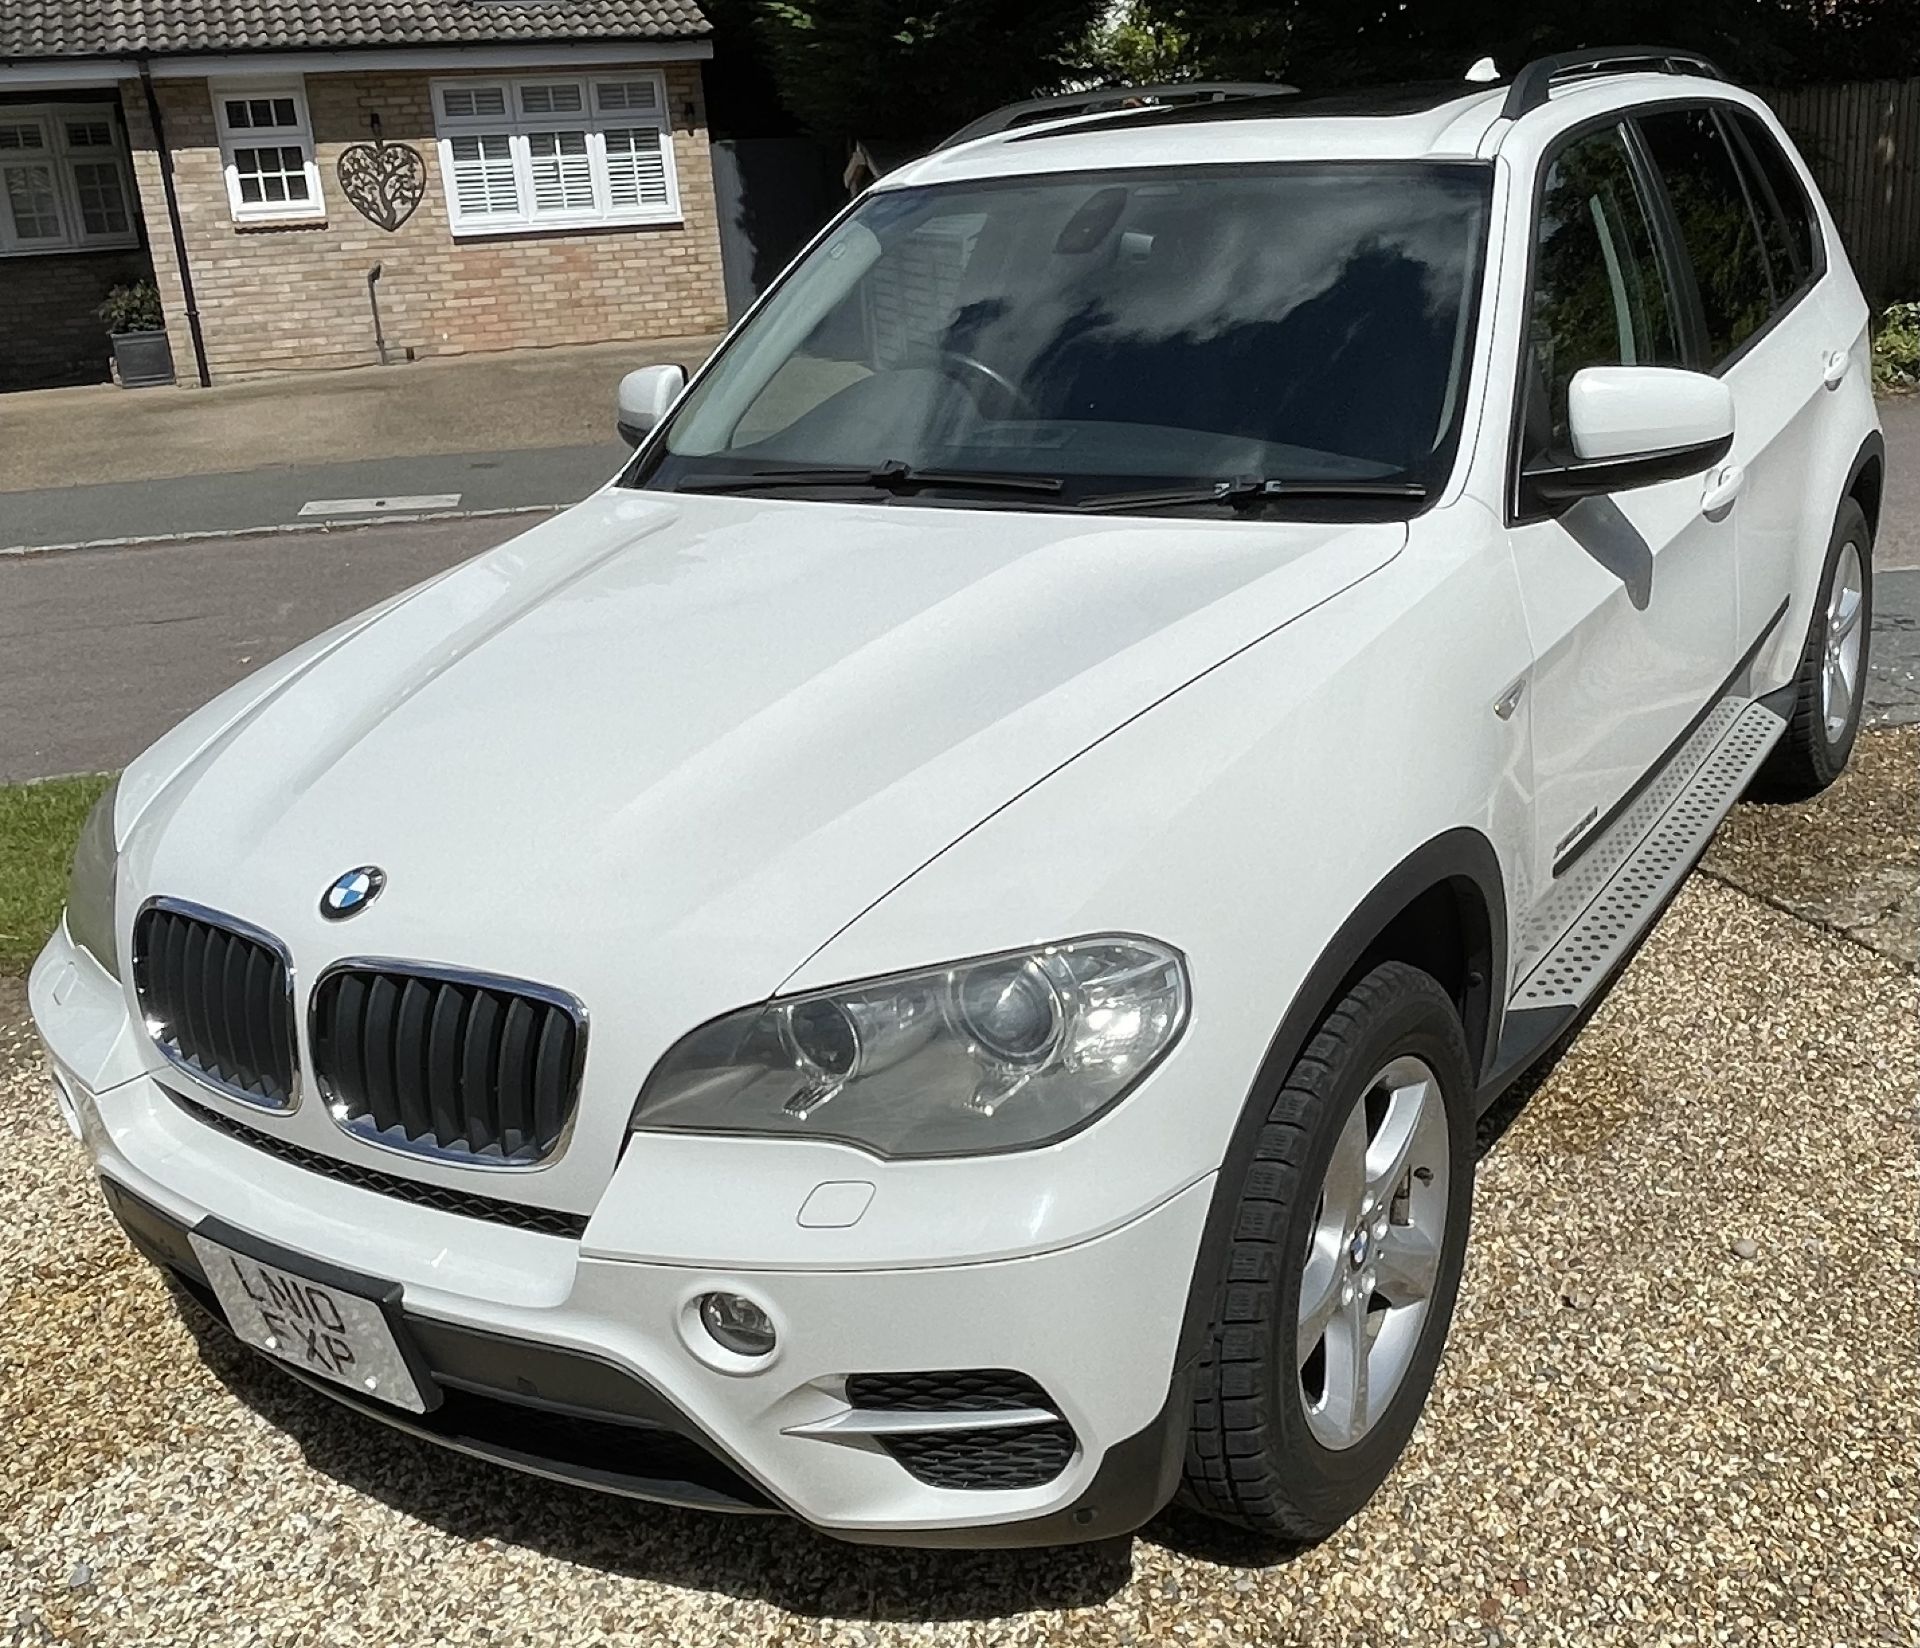 2010 BMW X5 Xdrive 35i - Petrol ULEZ complient. 3.0 Litre twin turbo. Low mileage. Leather interior - Image 2 of 21